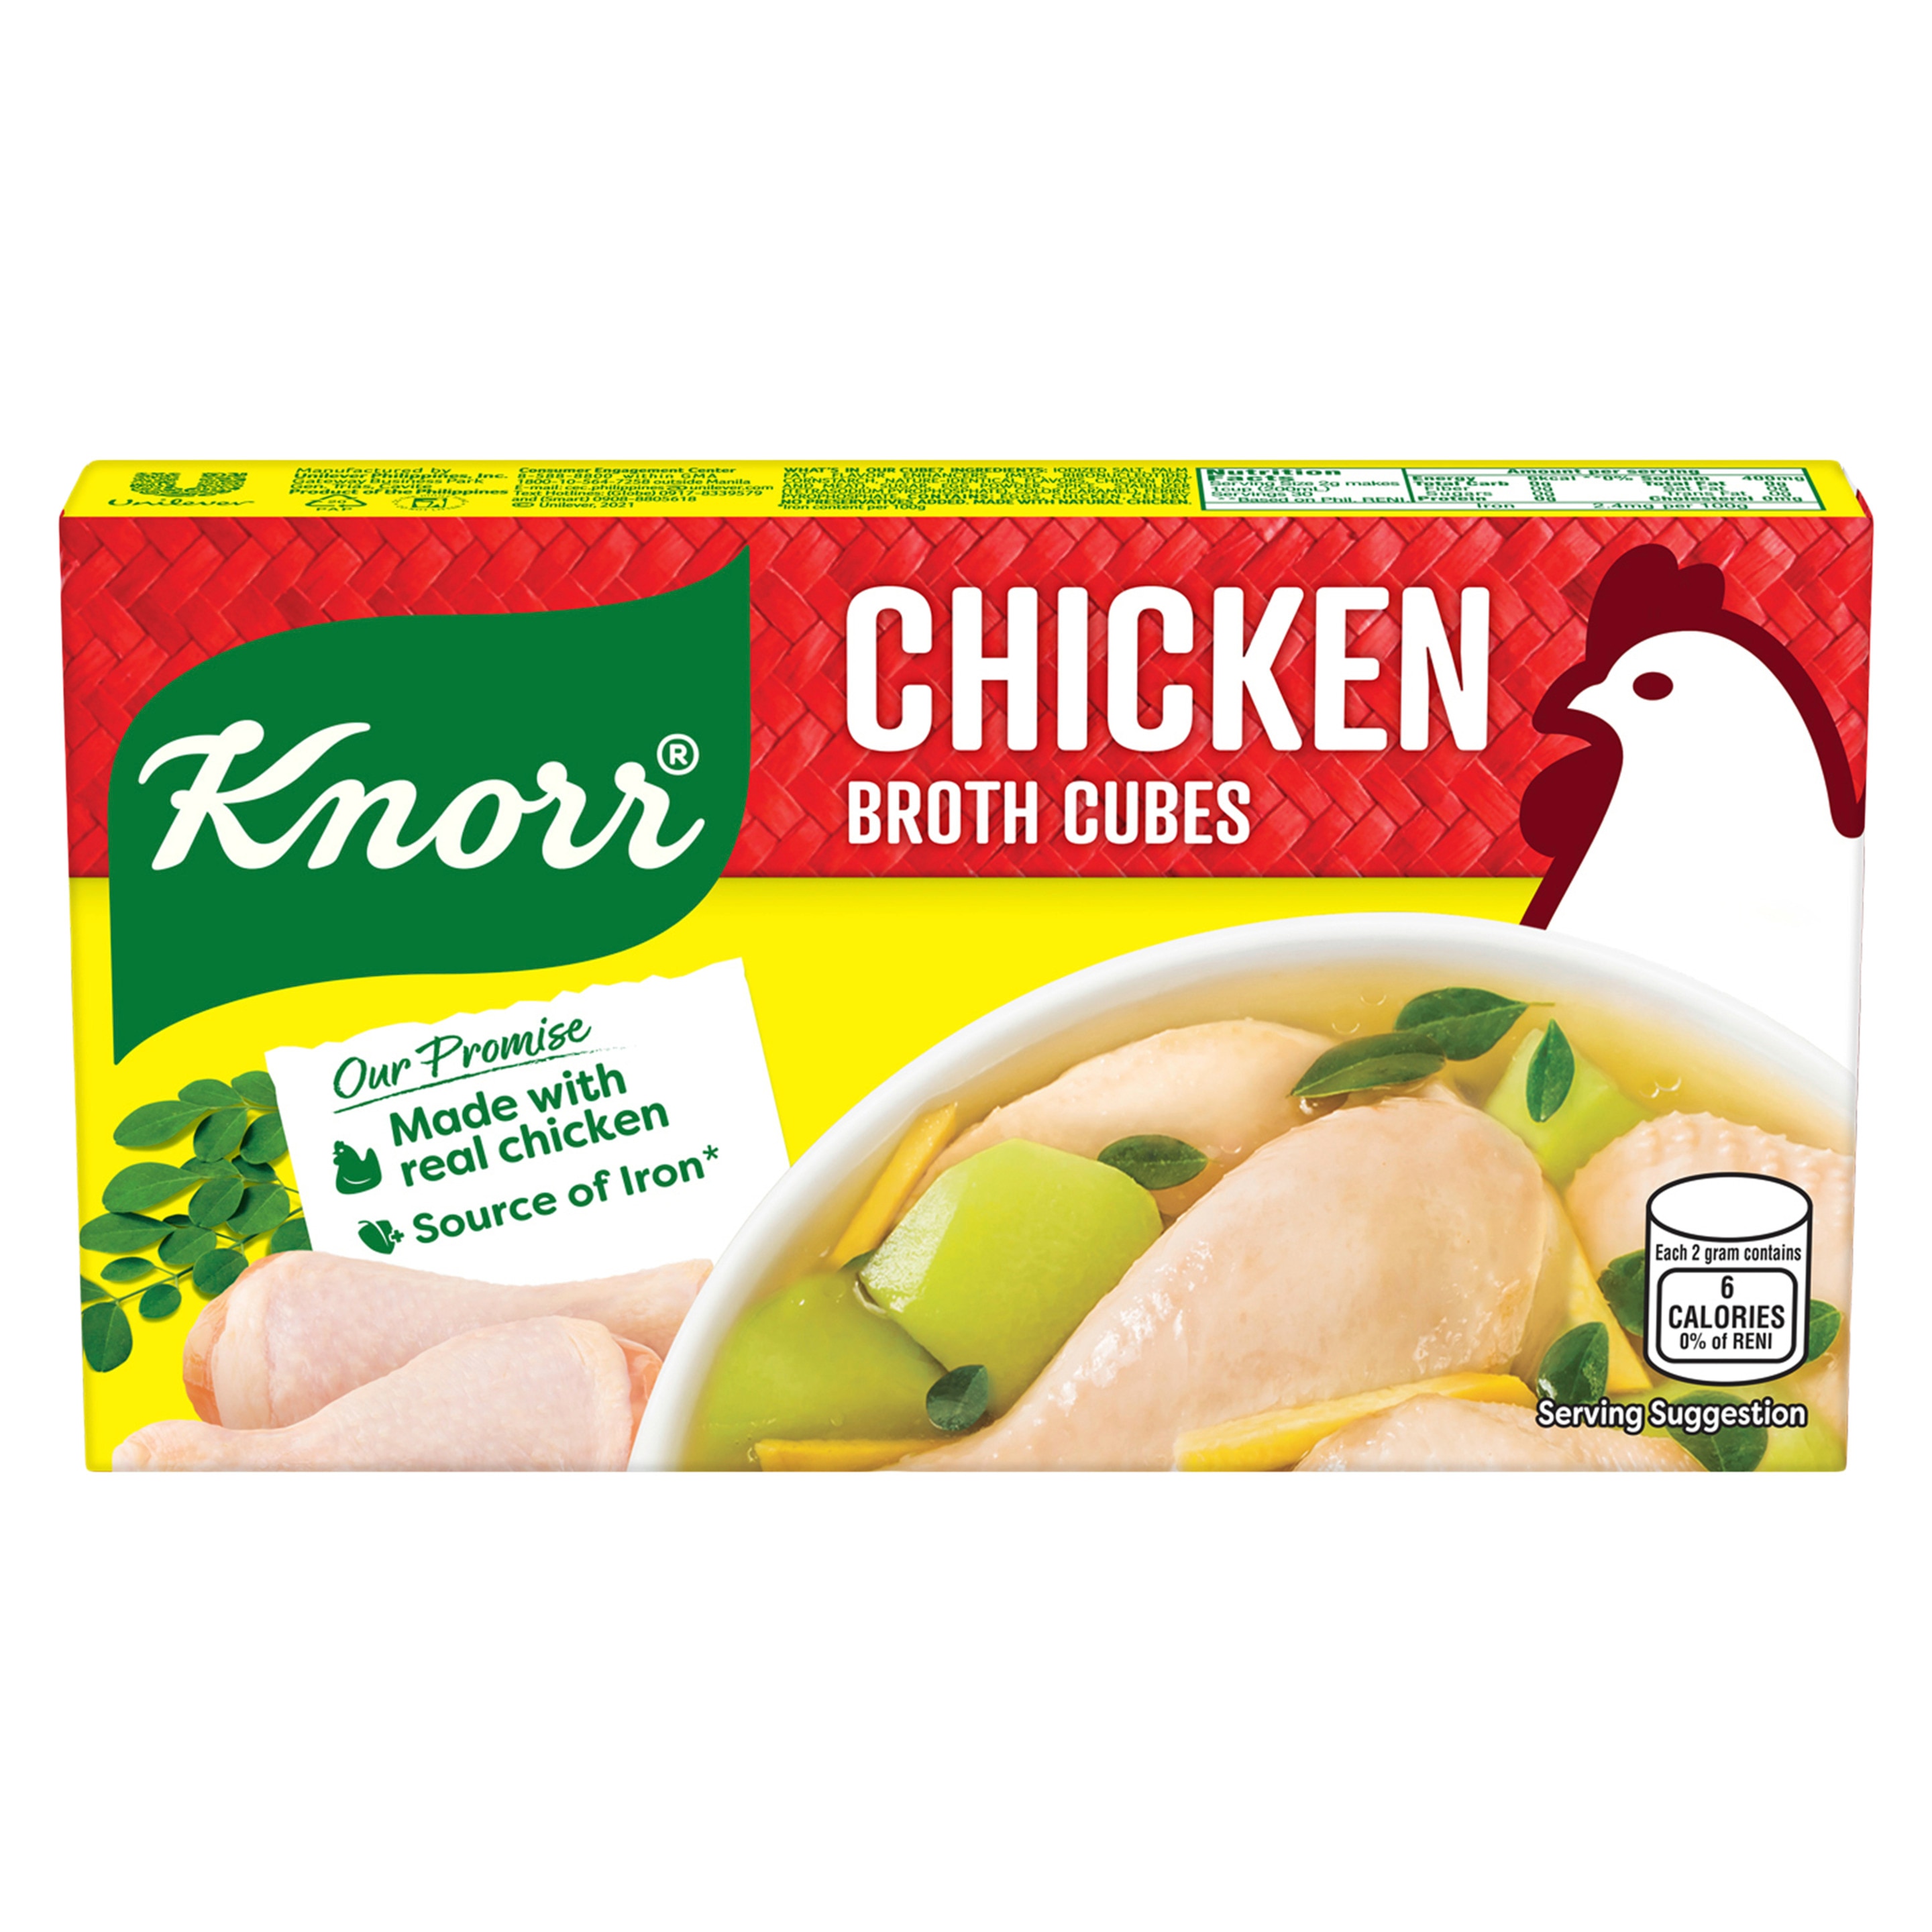 A pack of Knorr Chicken Broth Cubes